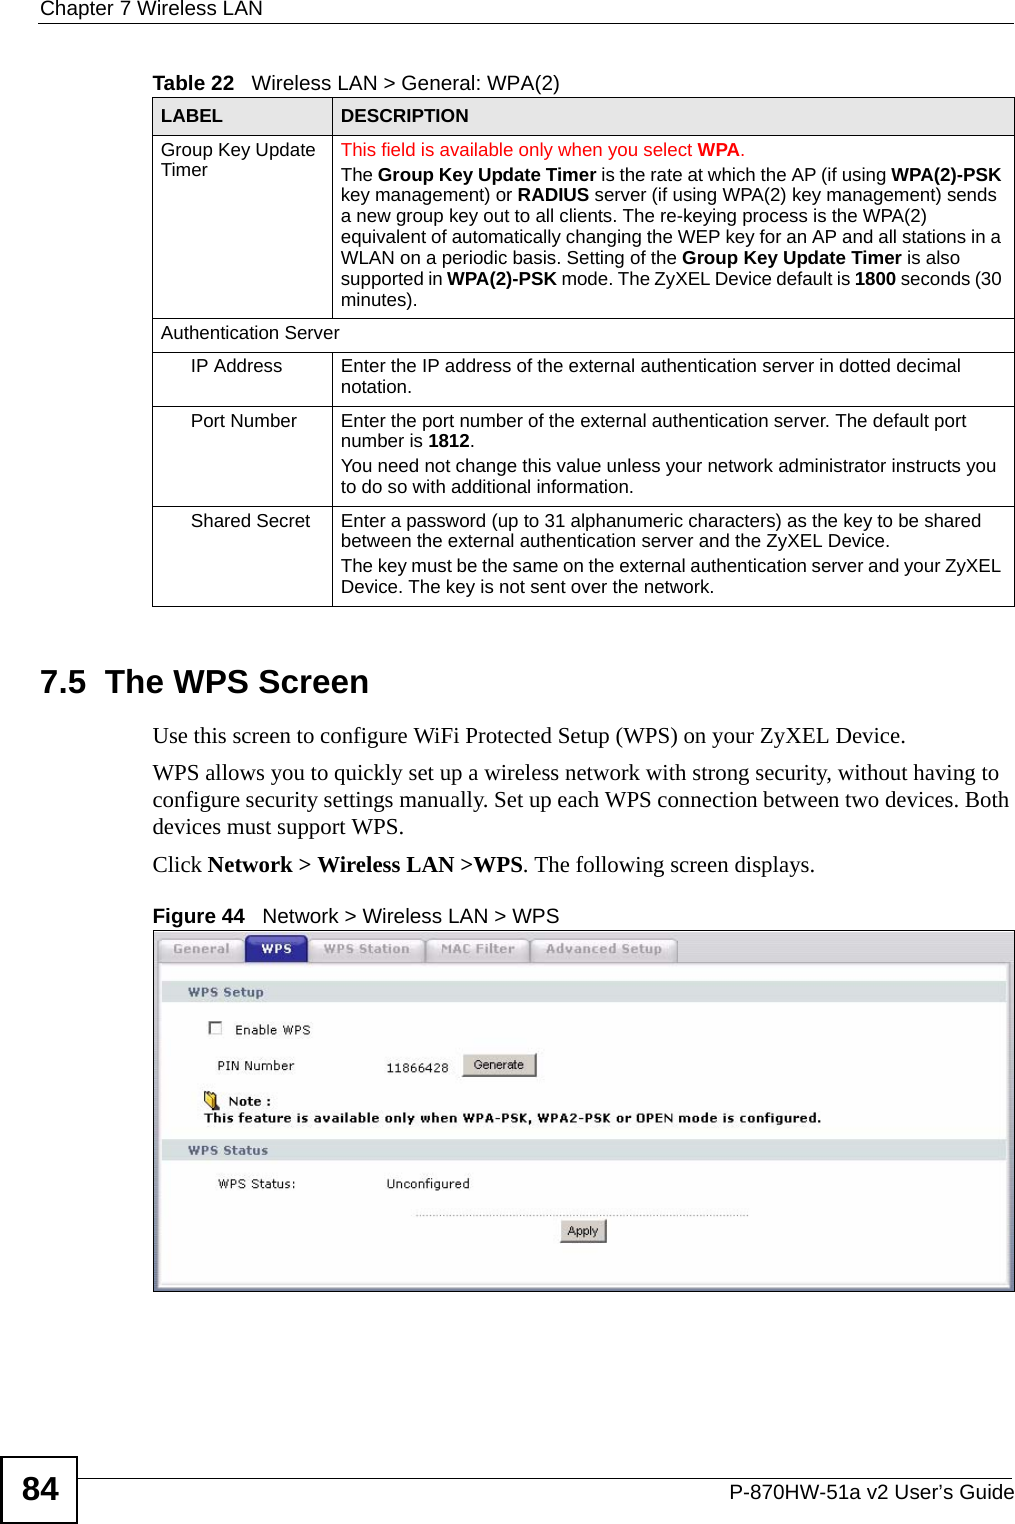 Chapter 7 Wireless LANP-870HW-51a v2 User’s Guide847.5  The WPS Screen Use this screen to configure WiFi Protected Setup (WPS) on your ZyXEL Device.WPS allows you to quickly set up a wireless network with strong security, without having to configure security settings manually. Set up each WPS connection between two devices. Both devices must support WPS. Click Network &gt; Wireless LAN &gt;WPS. The following screen displays.Figure 44   Network &gt; Wireless LAN &gt; WPSGroup Key Update Timer This field is available only when you select WPA.The Group Key Update Timer is the rate at which the AP (if using WPA(2)-PSK key management) or RADIUS server (if using WPA(2) key management) sends a new group key out to all clients. The re-keying process is the WPA(2) equivalent of automatically changing the WEP key for an AP and all stations in a WLAN on a periodic basis. Setting of the Group Key Update Timer is also supported in WPA(2)-PSK mode. The ZyXEL Device default is 1800 seconds (30 minutes).Authentication ServerIP Address Enter the IP address of the external authentication server in dotted decimal notation.Port Number Enter the port number of the external authentication server. The default port number is 1812. You need not change this value unless your network administrator instructs you to do so with additional information. Shared Secret Enter a password (up to 31 alphanumeric characters) as the key to be shared between the external authentication server and the ZyXEL Device.The key must be the same on the external authentication server and your ZyXEL Device. The key is not sent over the network. Table 22   Wireless LAN &gt; General: WPA(2)LABEL DESCRIPTION